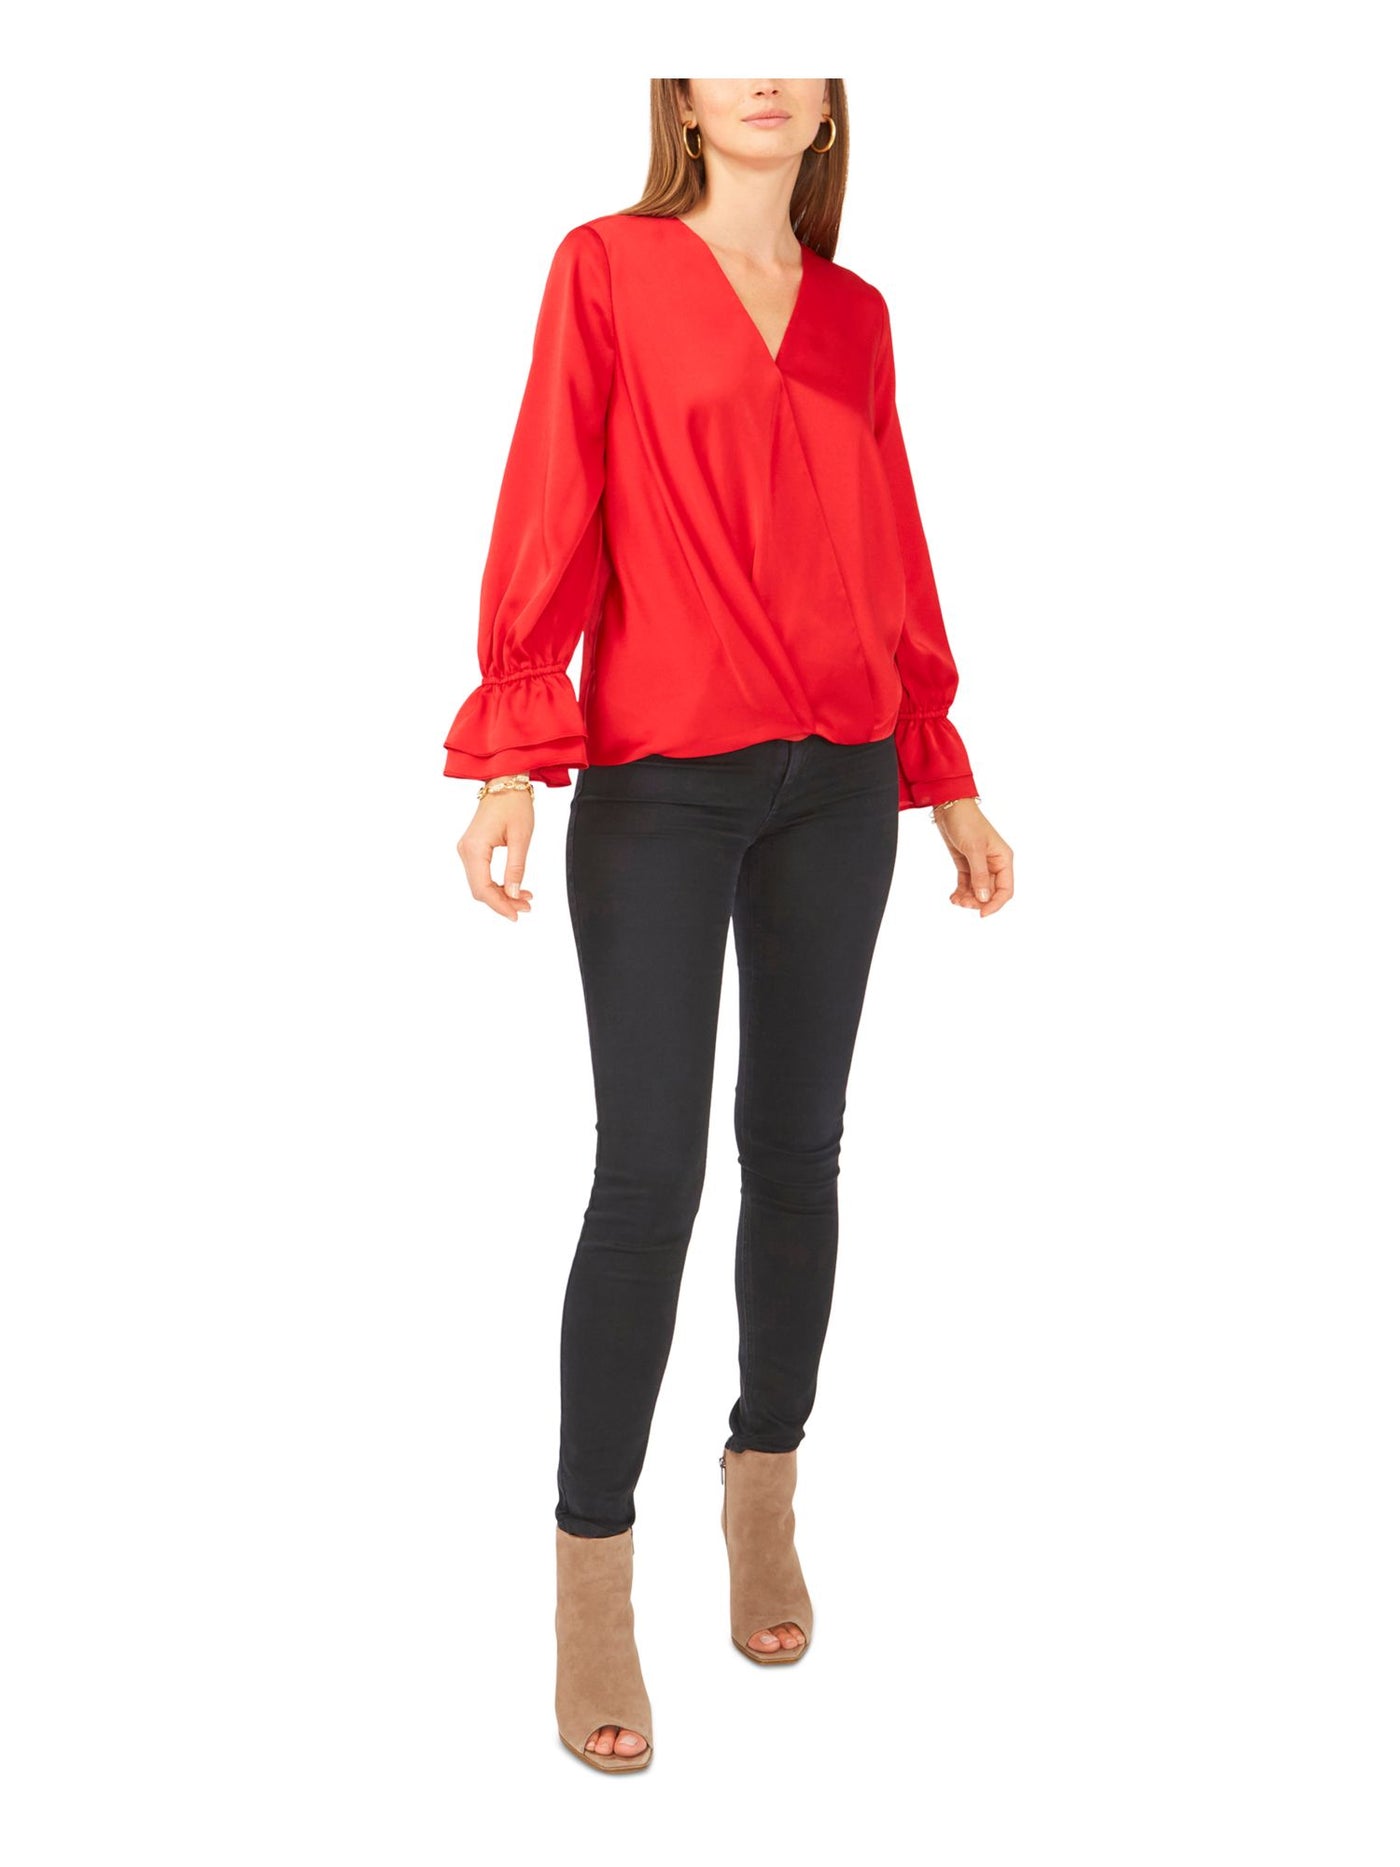 VINCE CAMUTO Womens Red Sheer Ruffled-cuff Long Sleeve Surplice Neckline Wear To Work Faux Wrap Top S